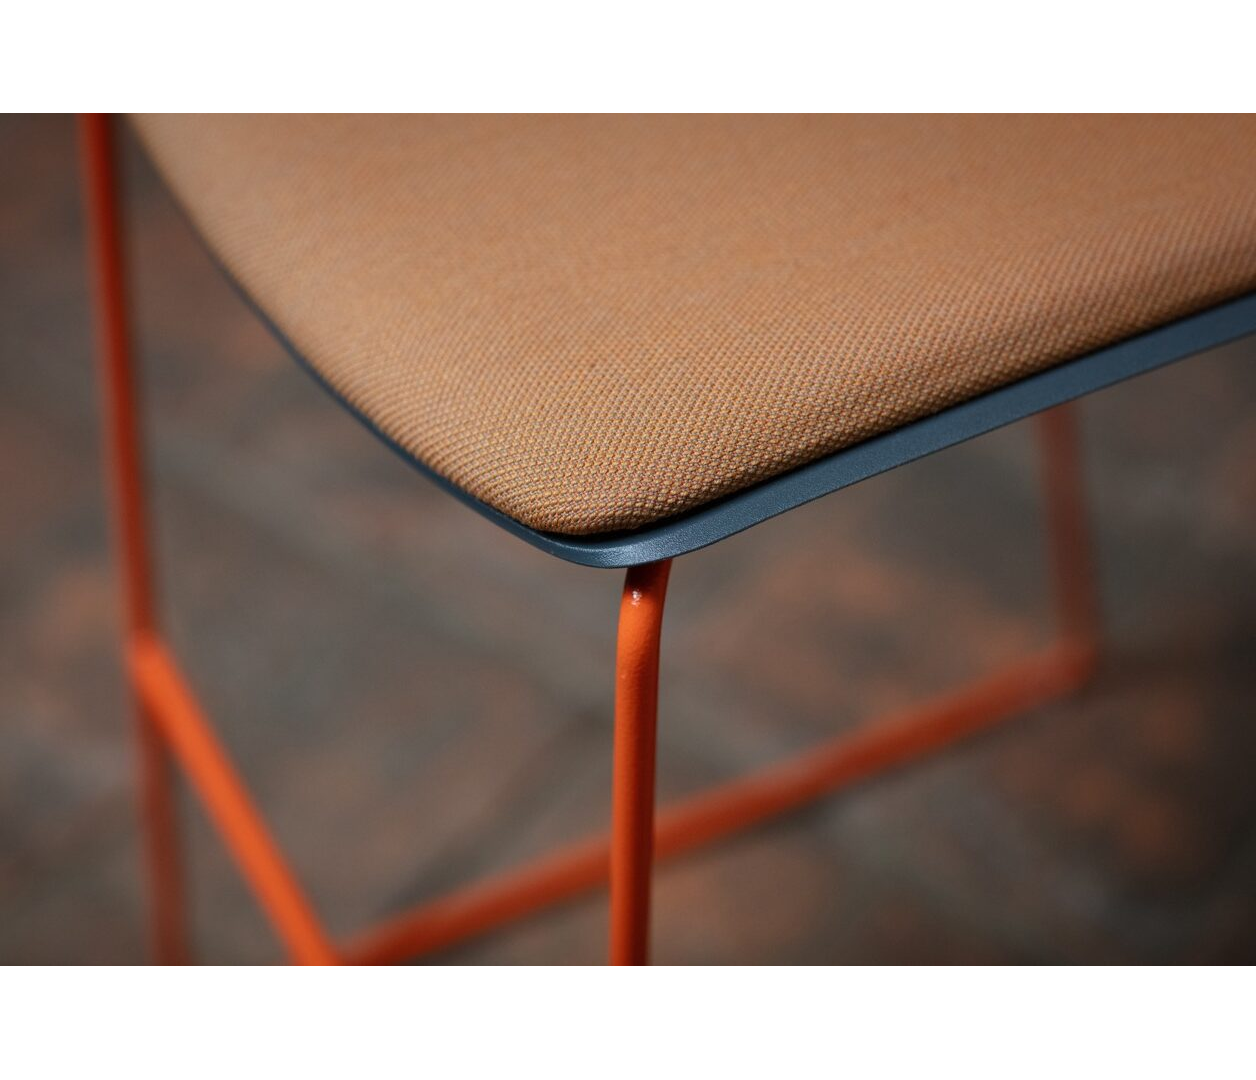 OCEE&FOUR – Chairs – FourSure 105 – Details Image 4 Large